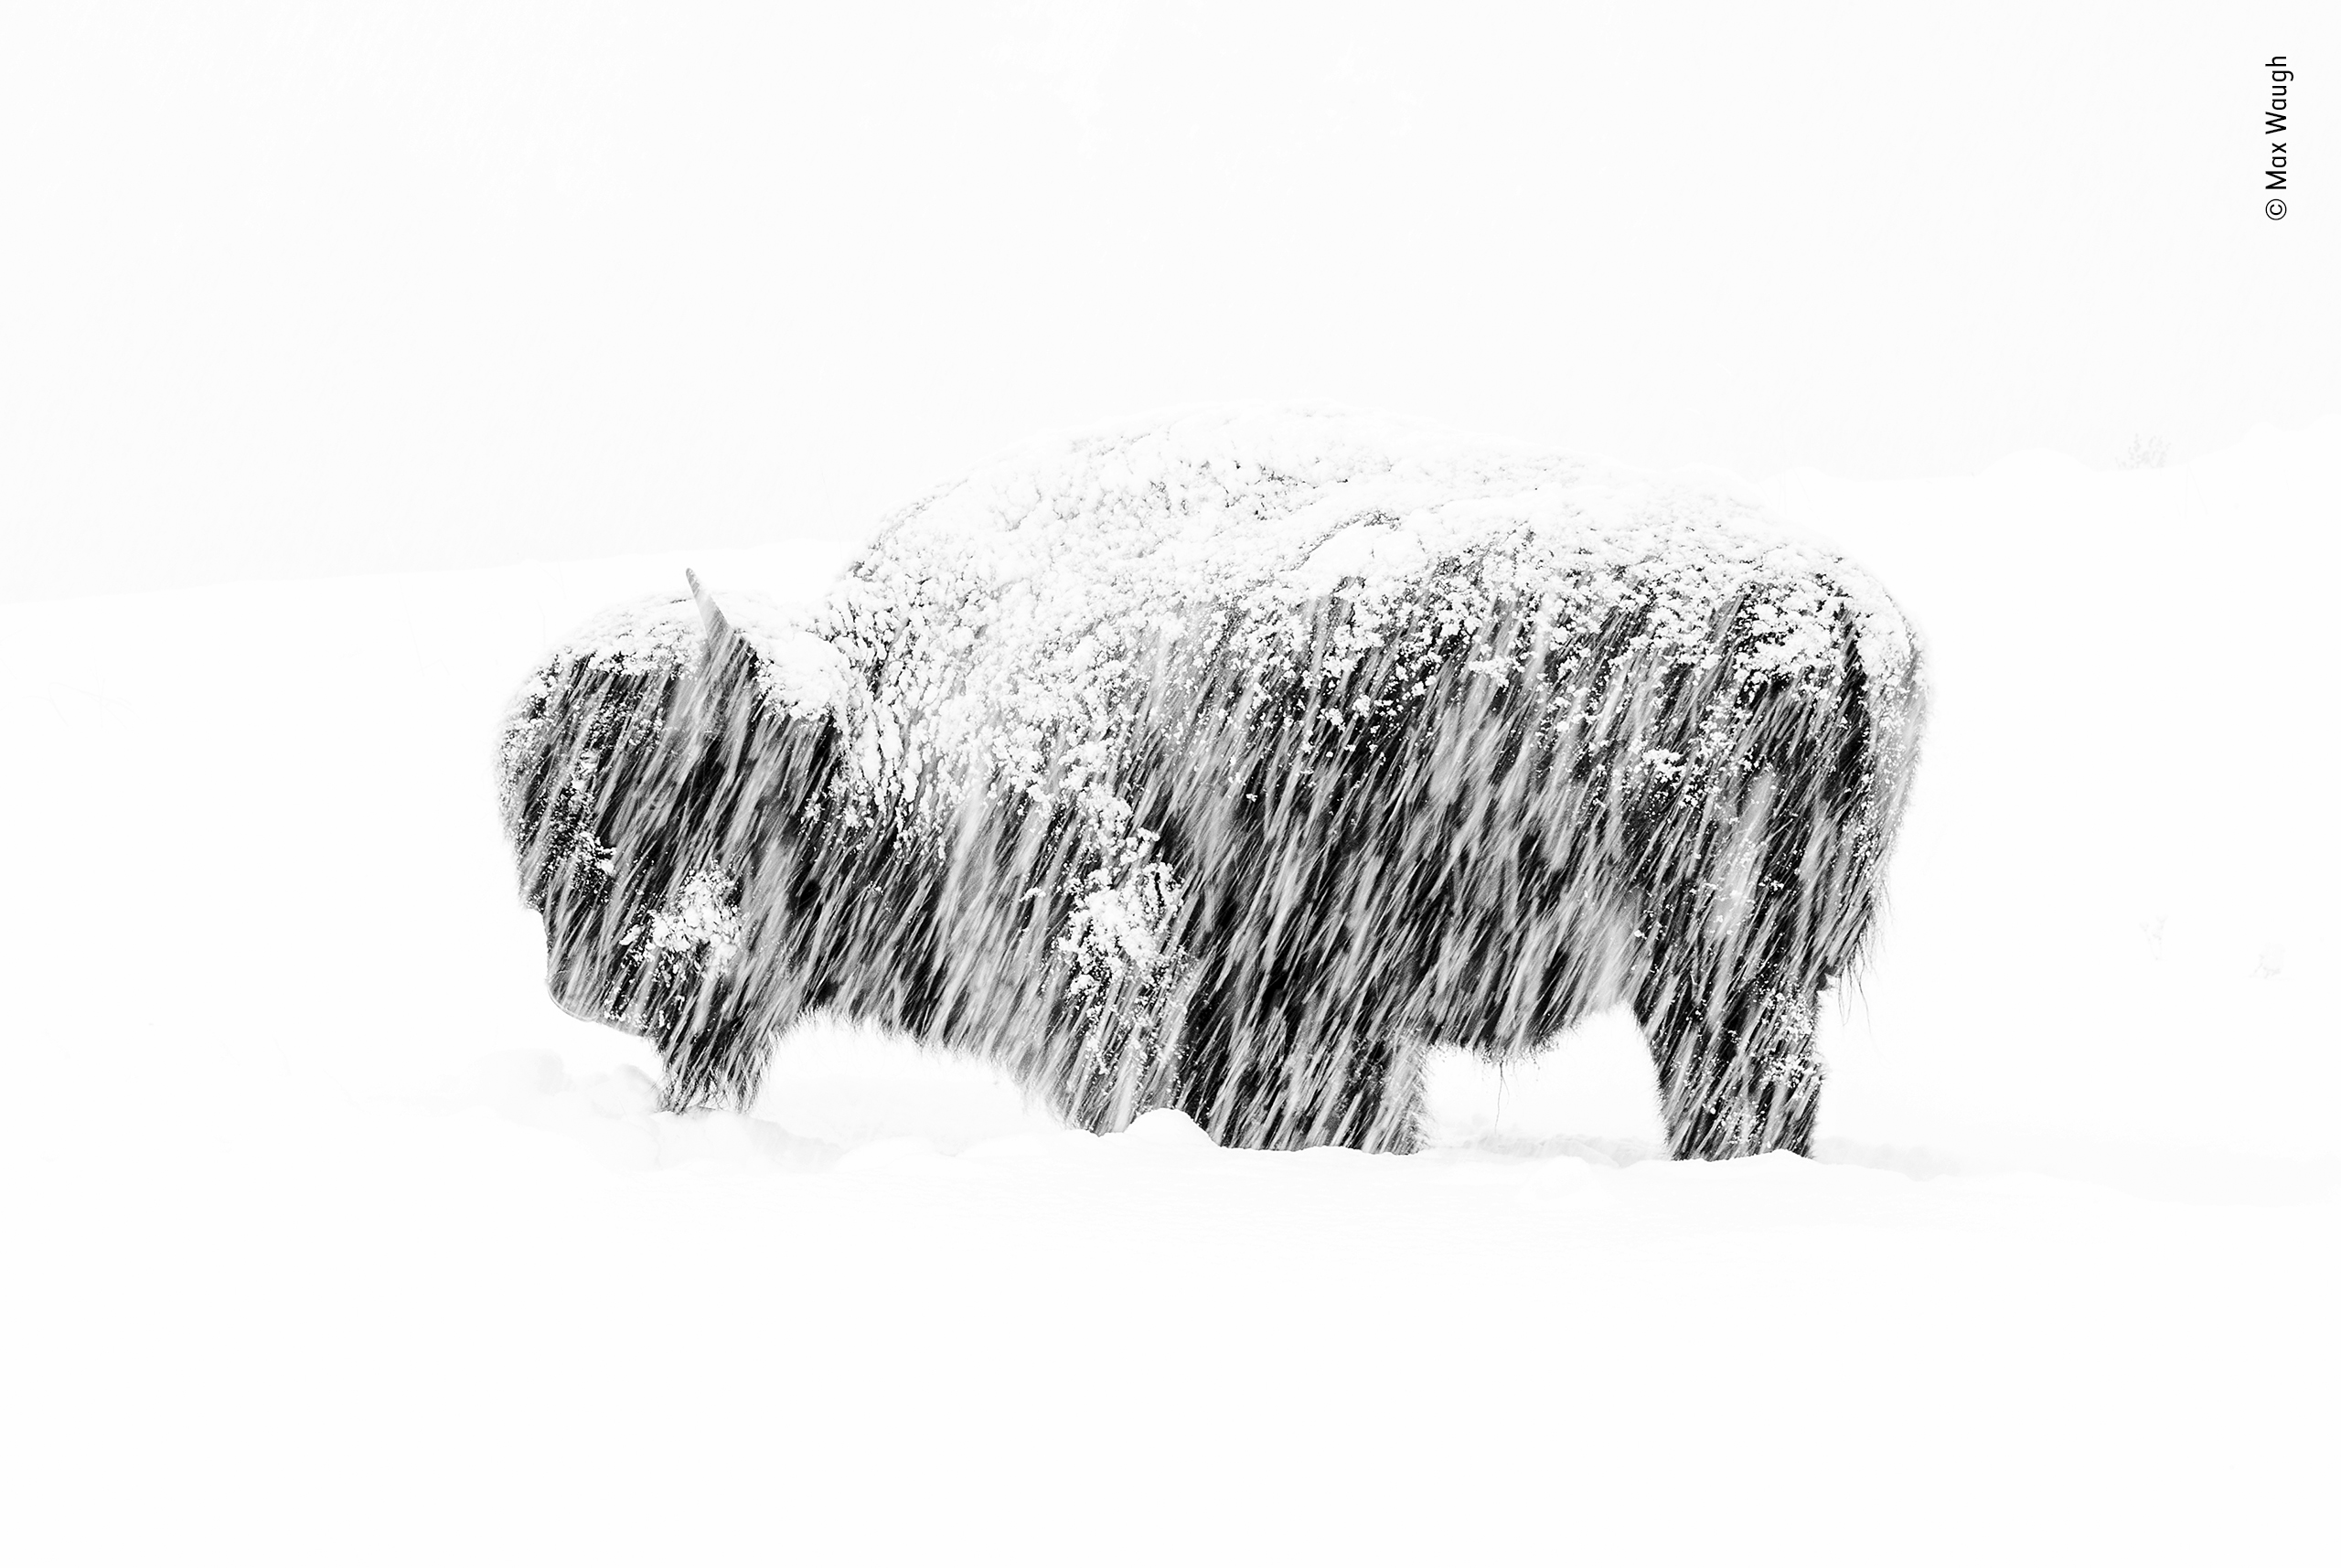 An American bison endures a thick snowfall in Yellowstone National Park. Since the heavy snow made it hard to pick out details in this scene, I purposely slowed my shutter speed in order to "paint" lines across the telltale silhouette of the bison and create a more abstract image.